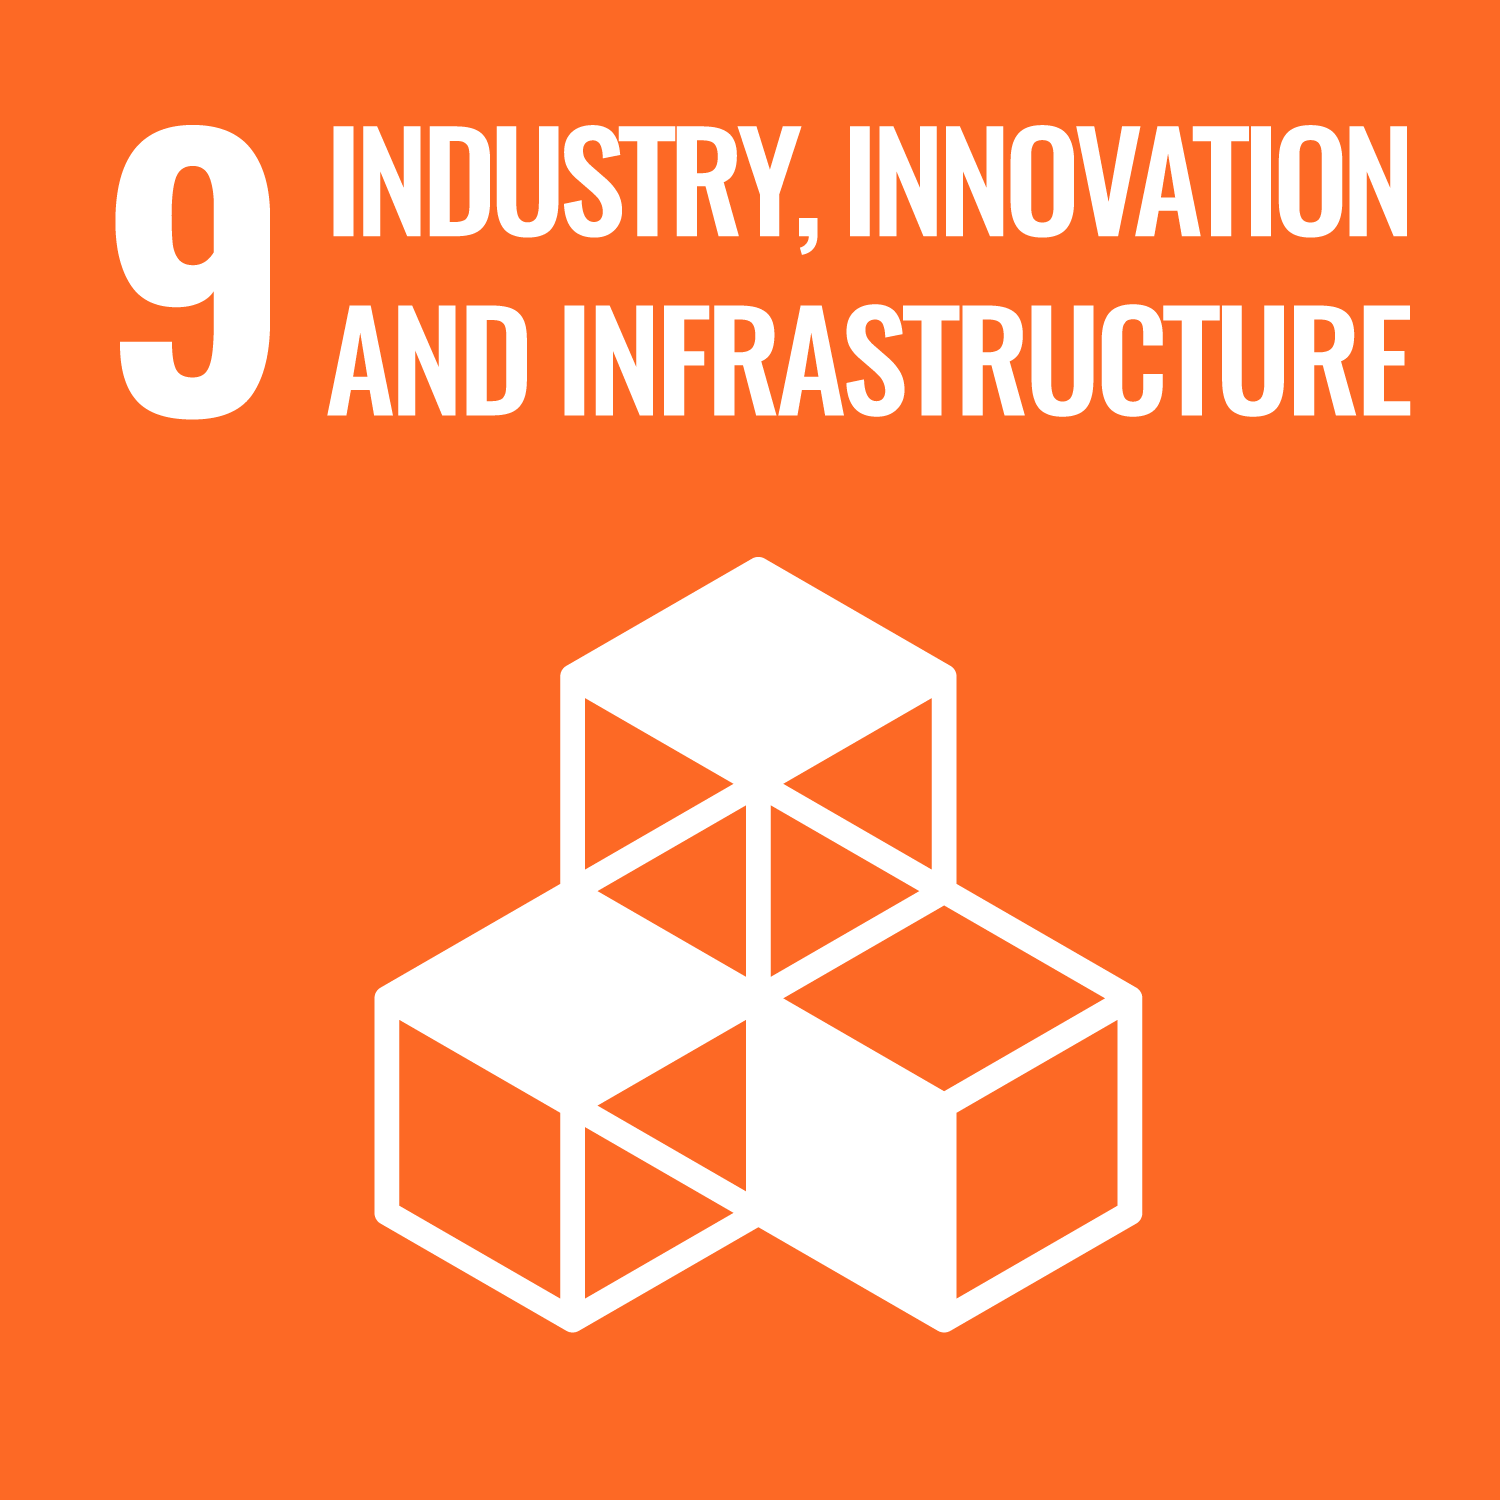 9 INDUSTRY, INNOVATION, INFRASTRUCTURE